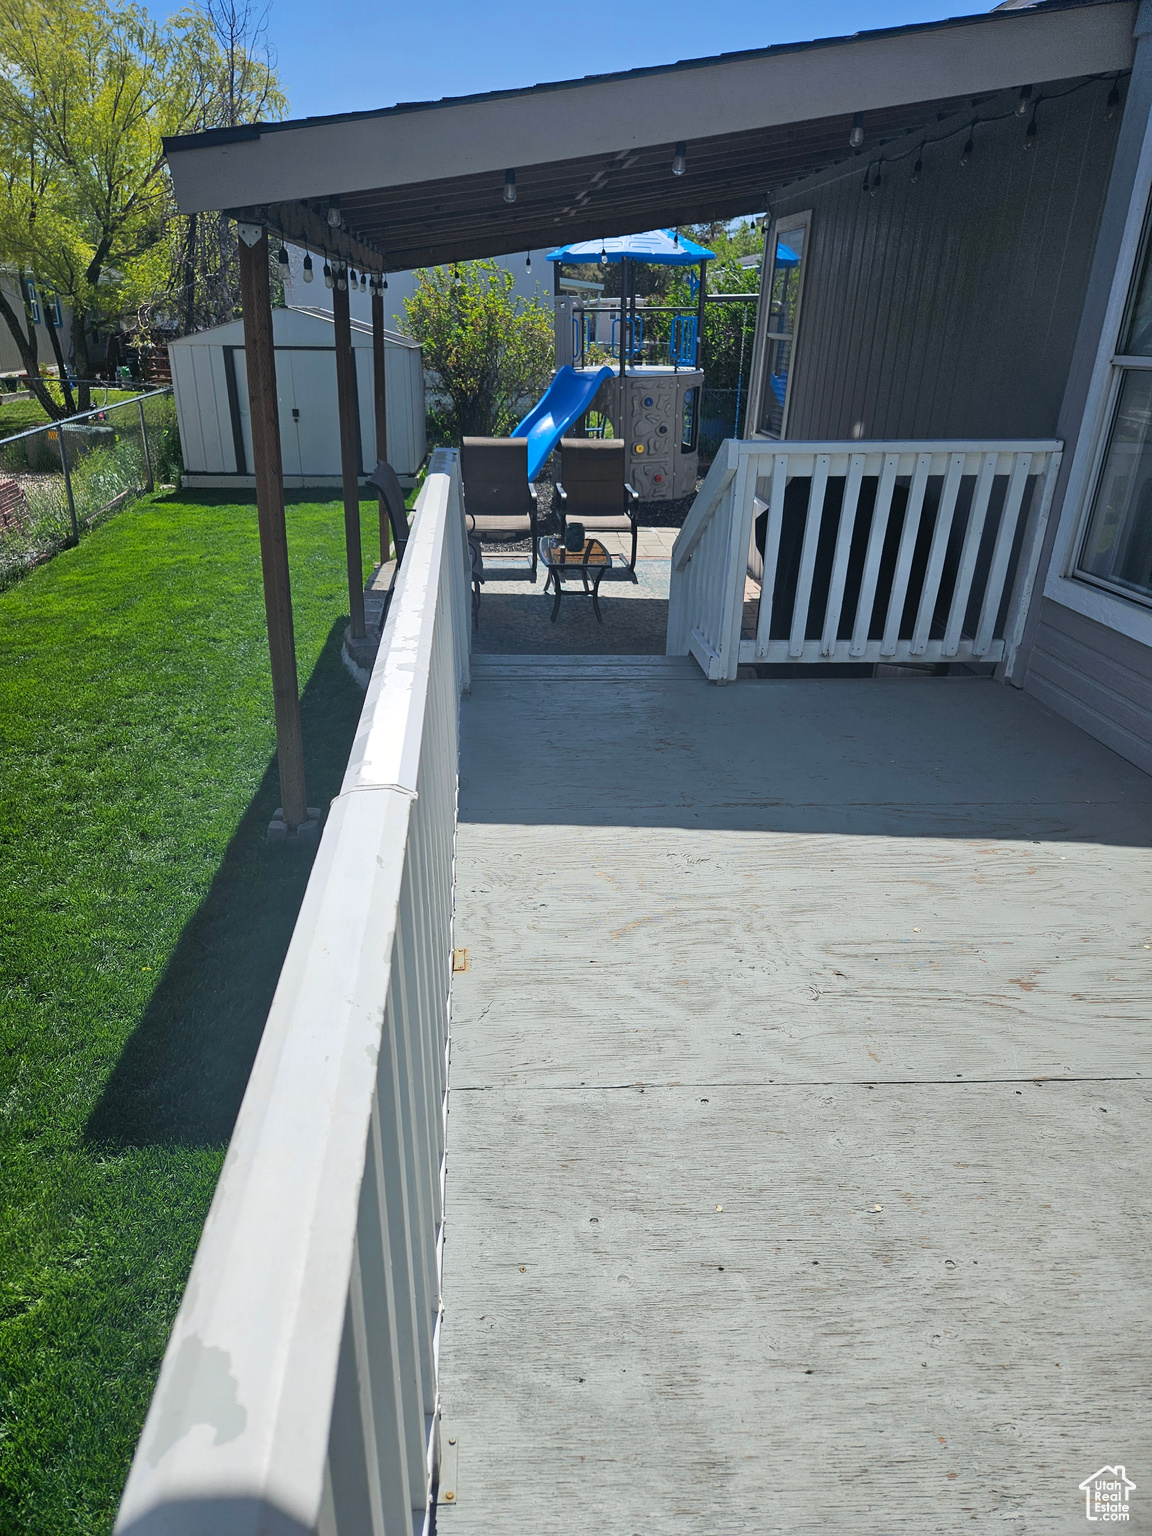 View of patio with a playground and a storage shed